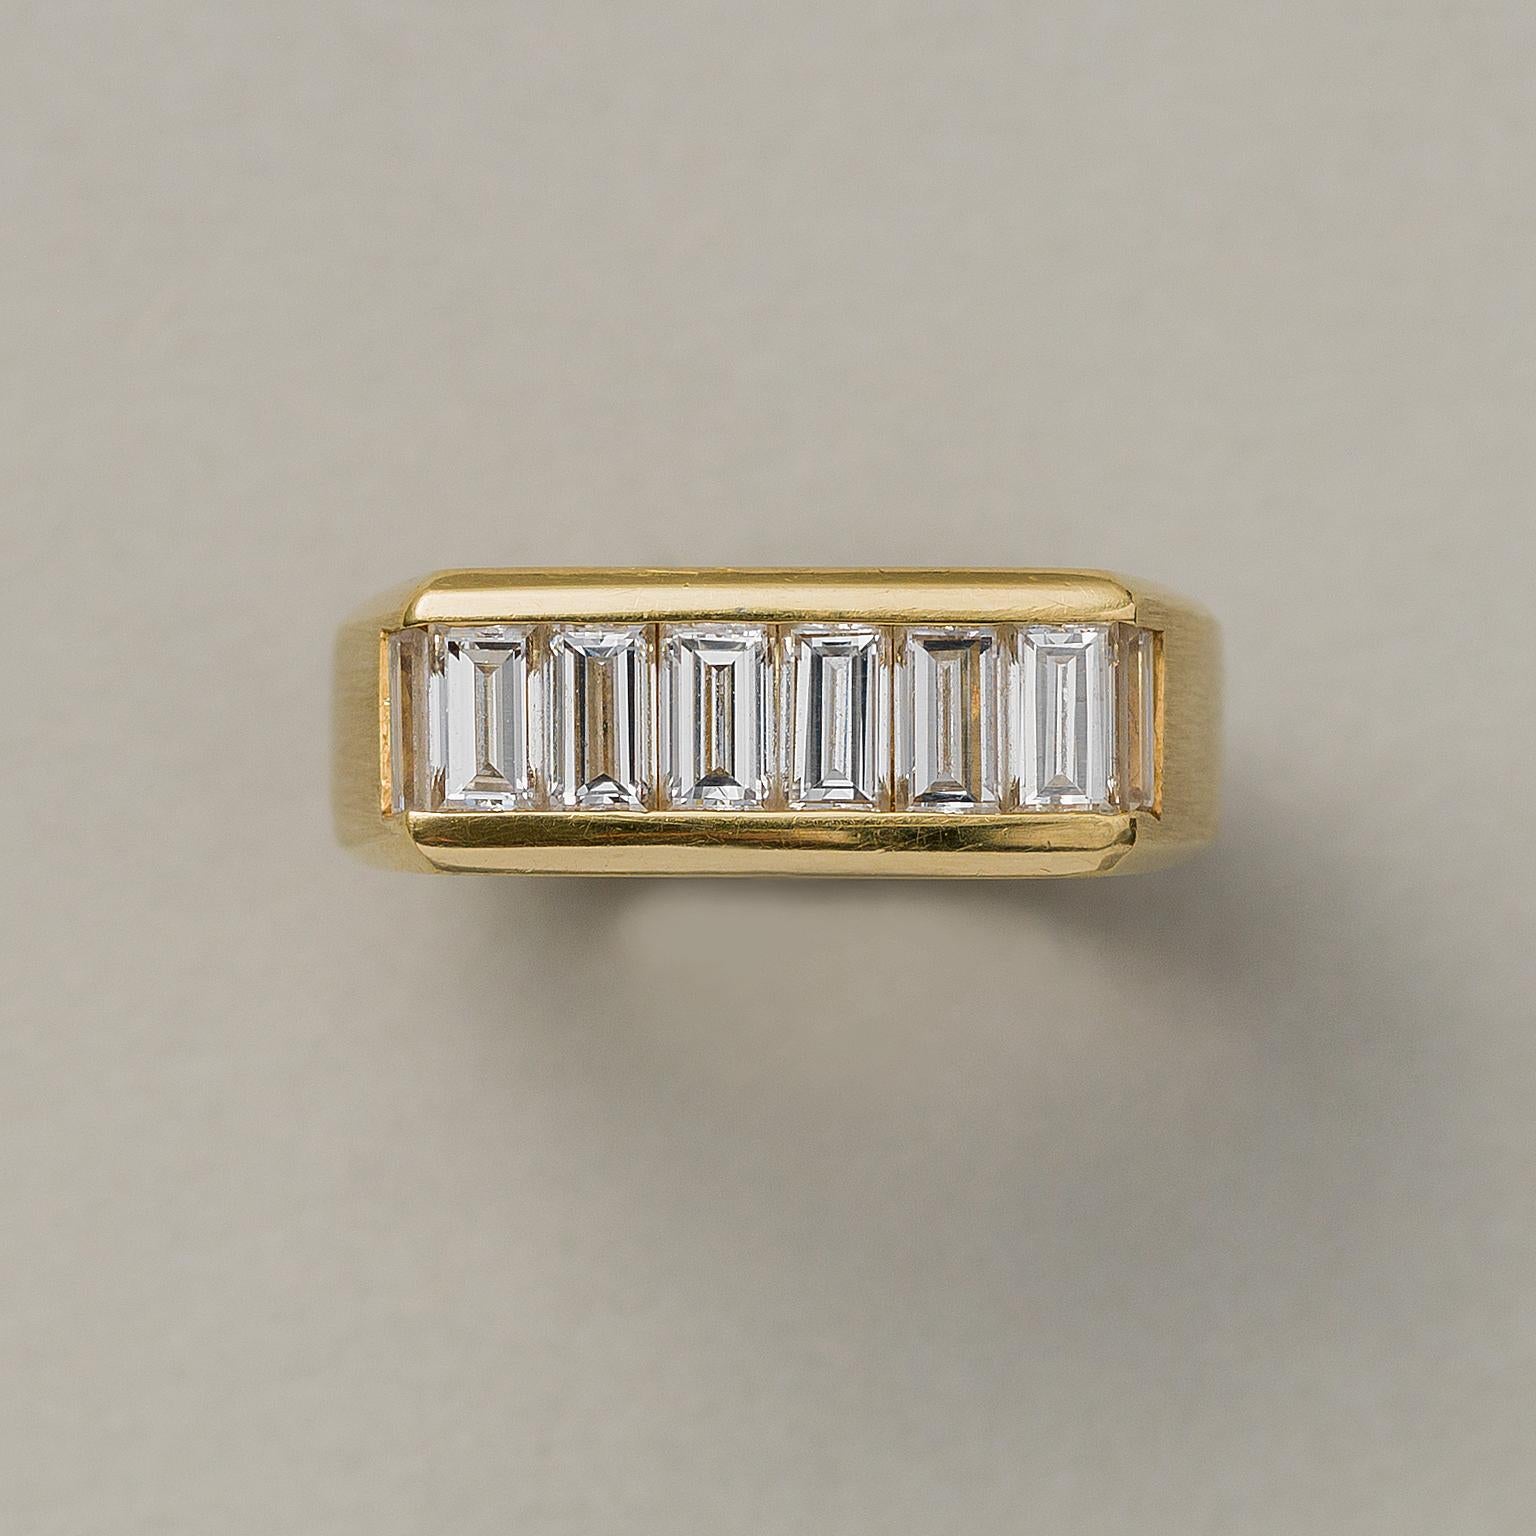 An elegant 18 carat yellow gold band ring with baguette cut diamonds (6 x 0.15 and 2 x 0.11, so app. 1.12 carat in total F-G, VS), signed and numbered Kurt Wayne 44605, circa 1960.

weight: 9.31 grams
ring size: 16.75 mm / 6 ¼ US
width: 6.6 - 4.3 mm